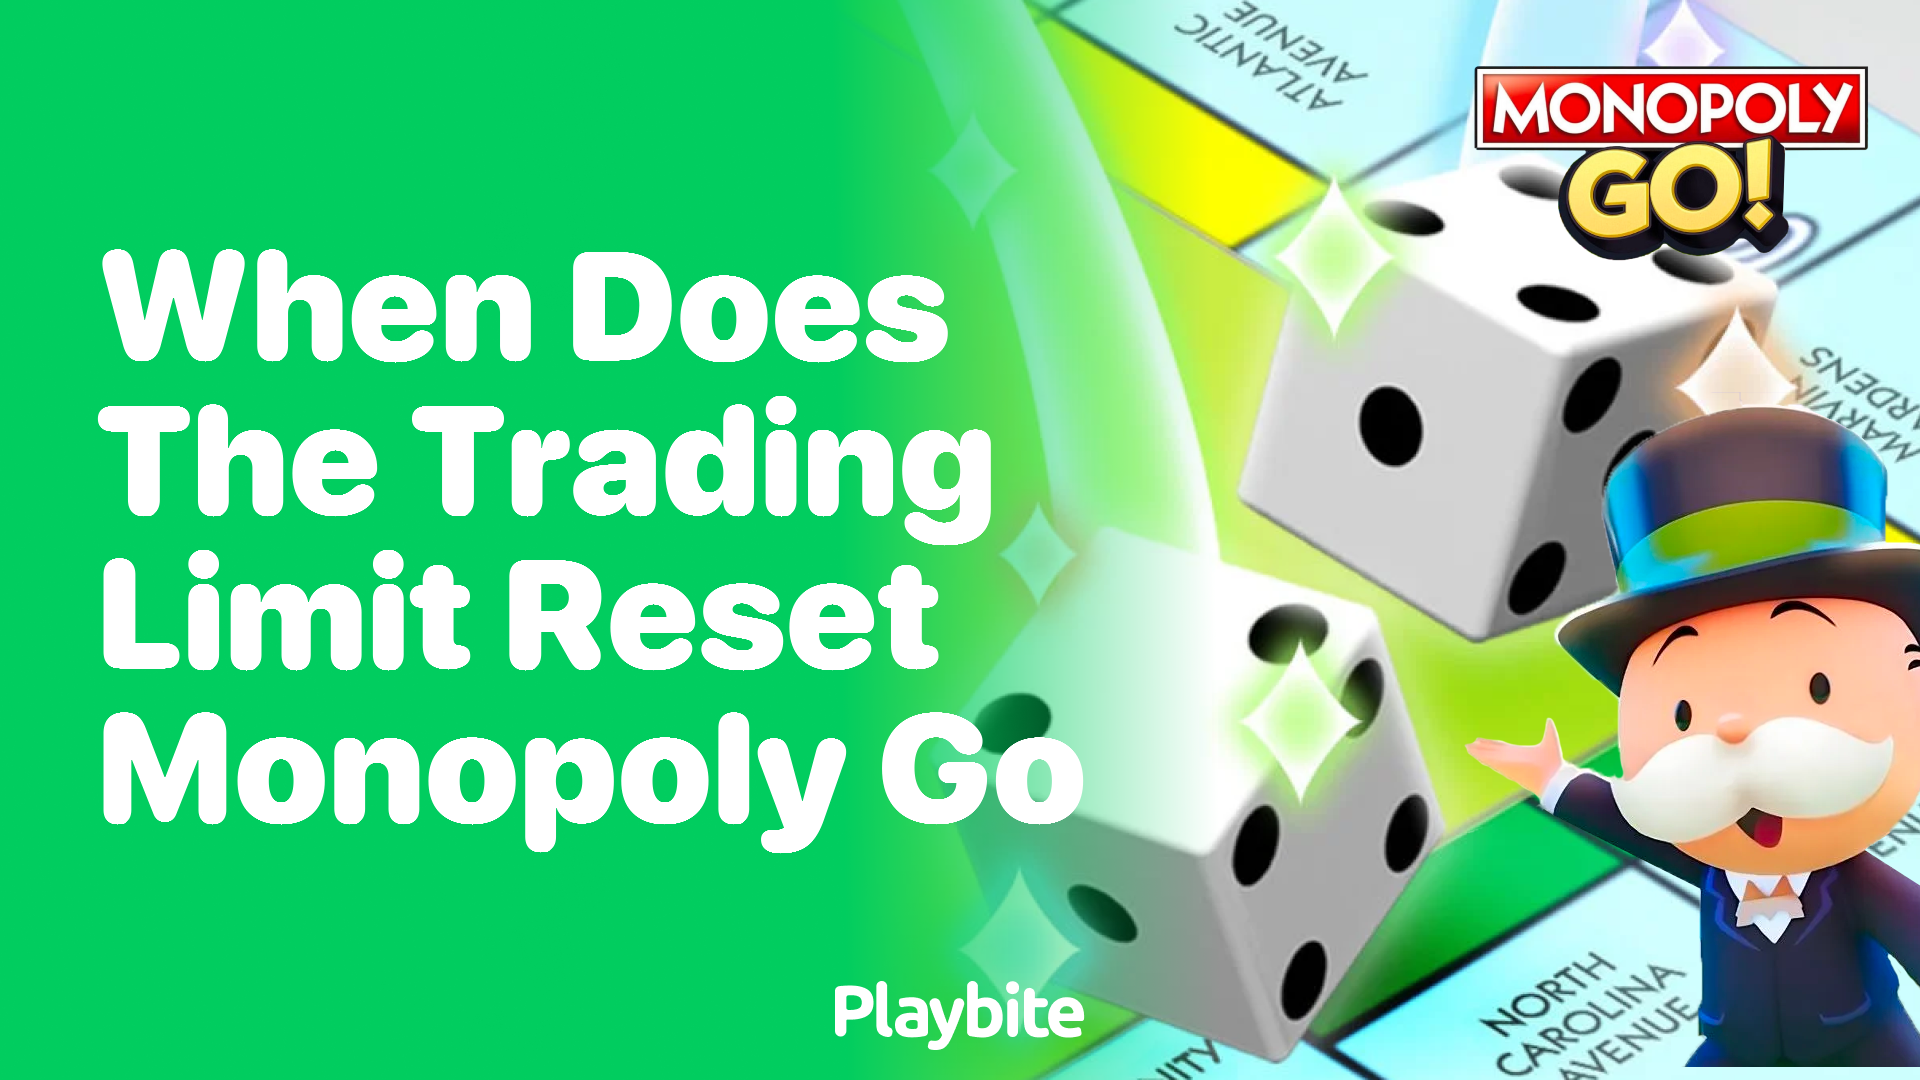 When Does the Trading Limit Reset in Monopoly Go?